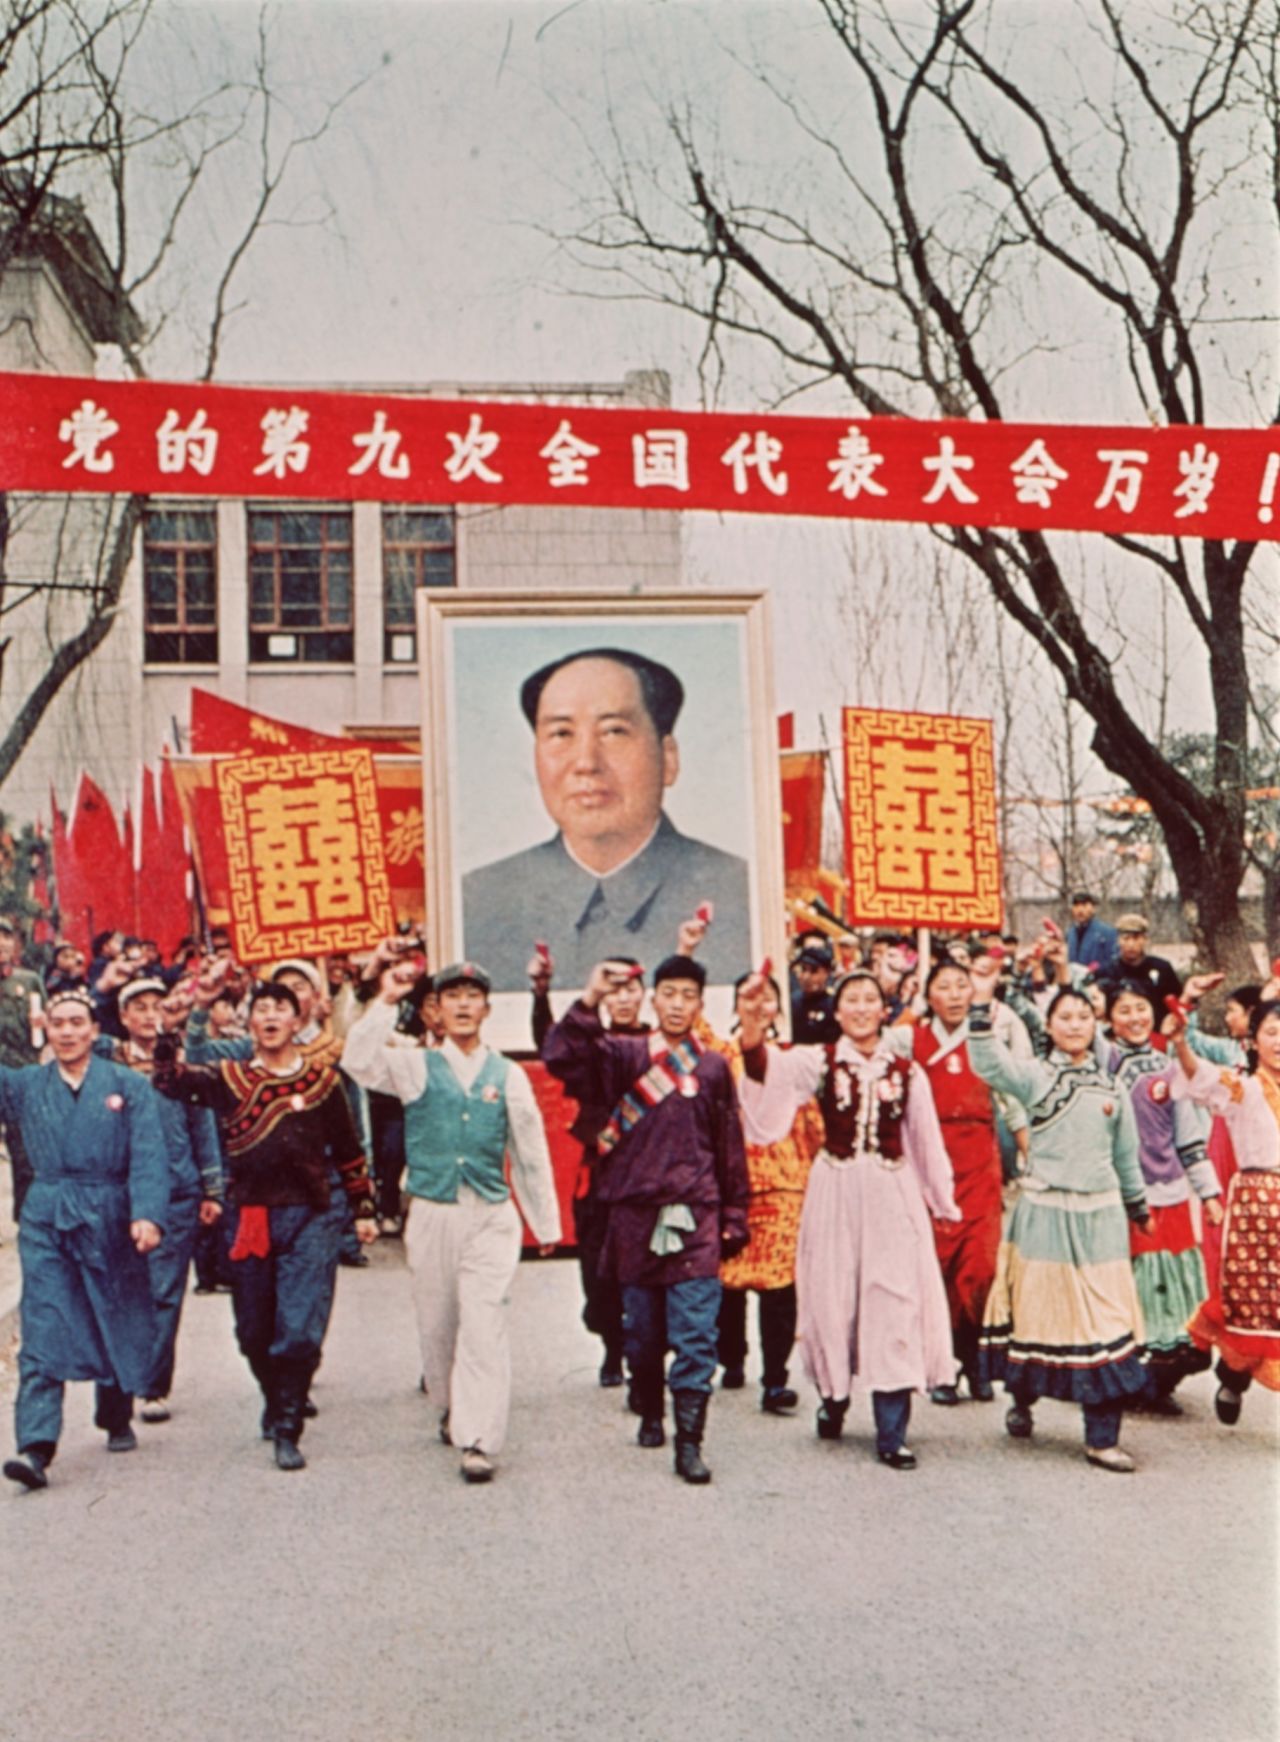 Supporters march down the street carrying a large poster of Chairman Mao Zedong.